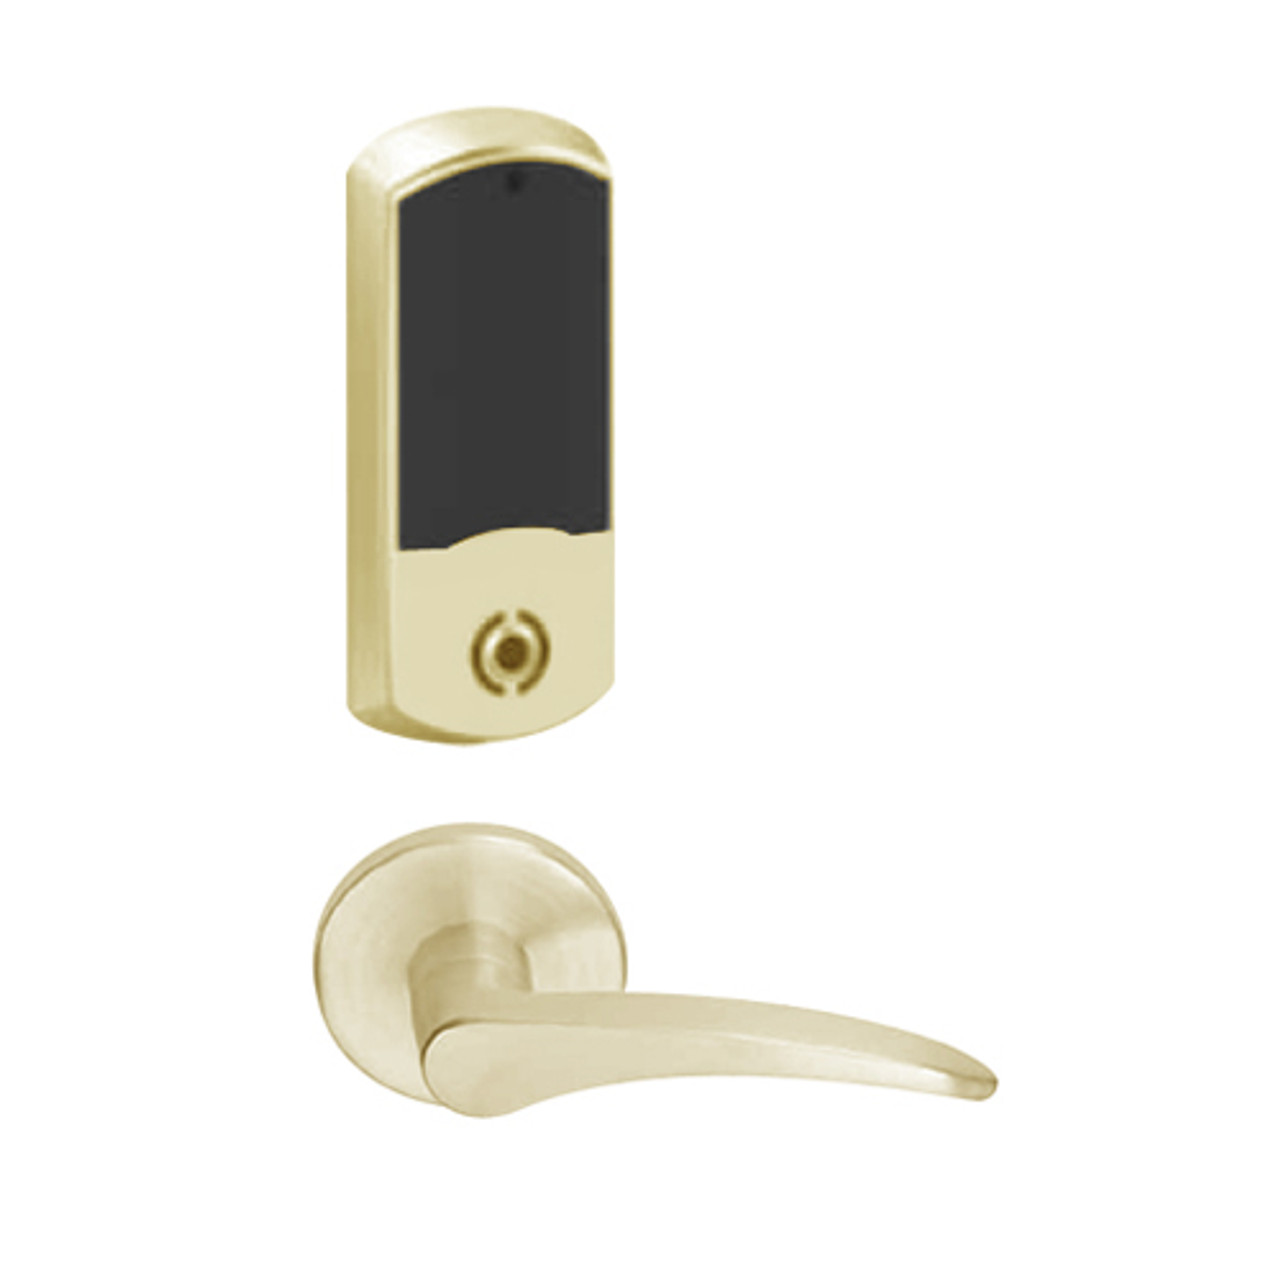 LEMS-GRW-P-12-606-00B-RH Schlage Storeroom Wireless Greenwich Mortise Lock with LED Indicator and 12 Lever in Satin Brass